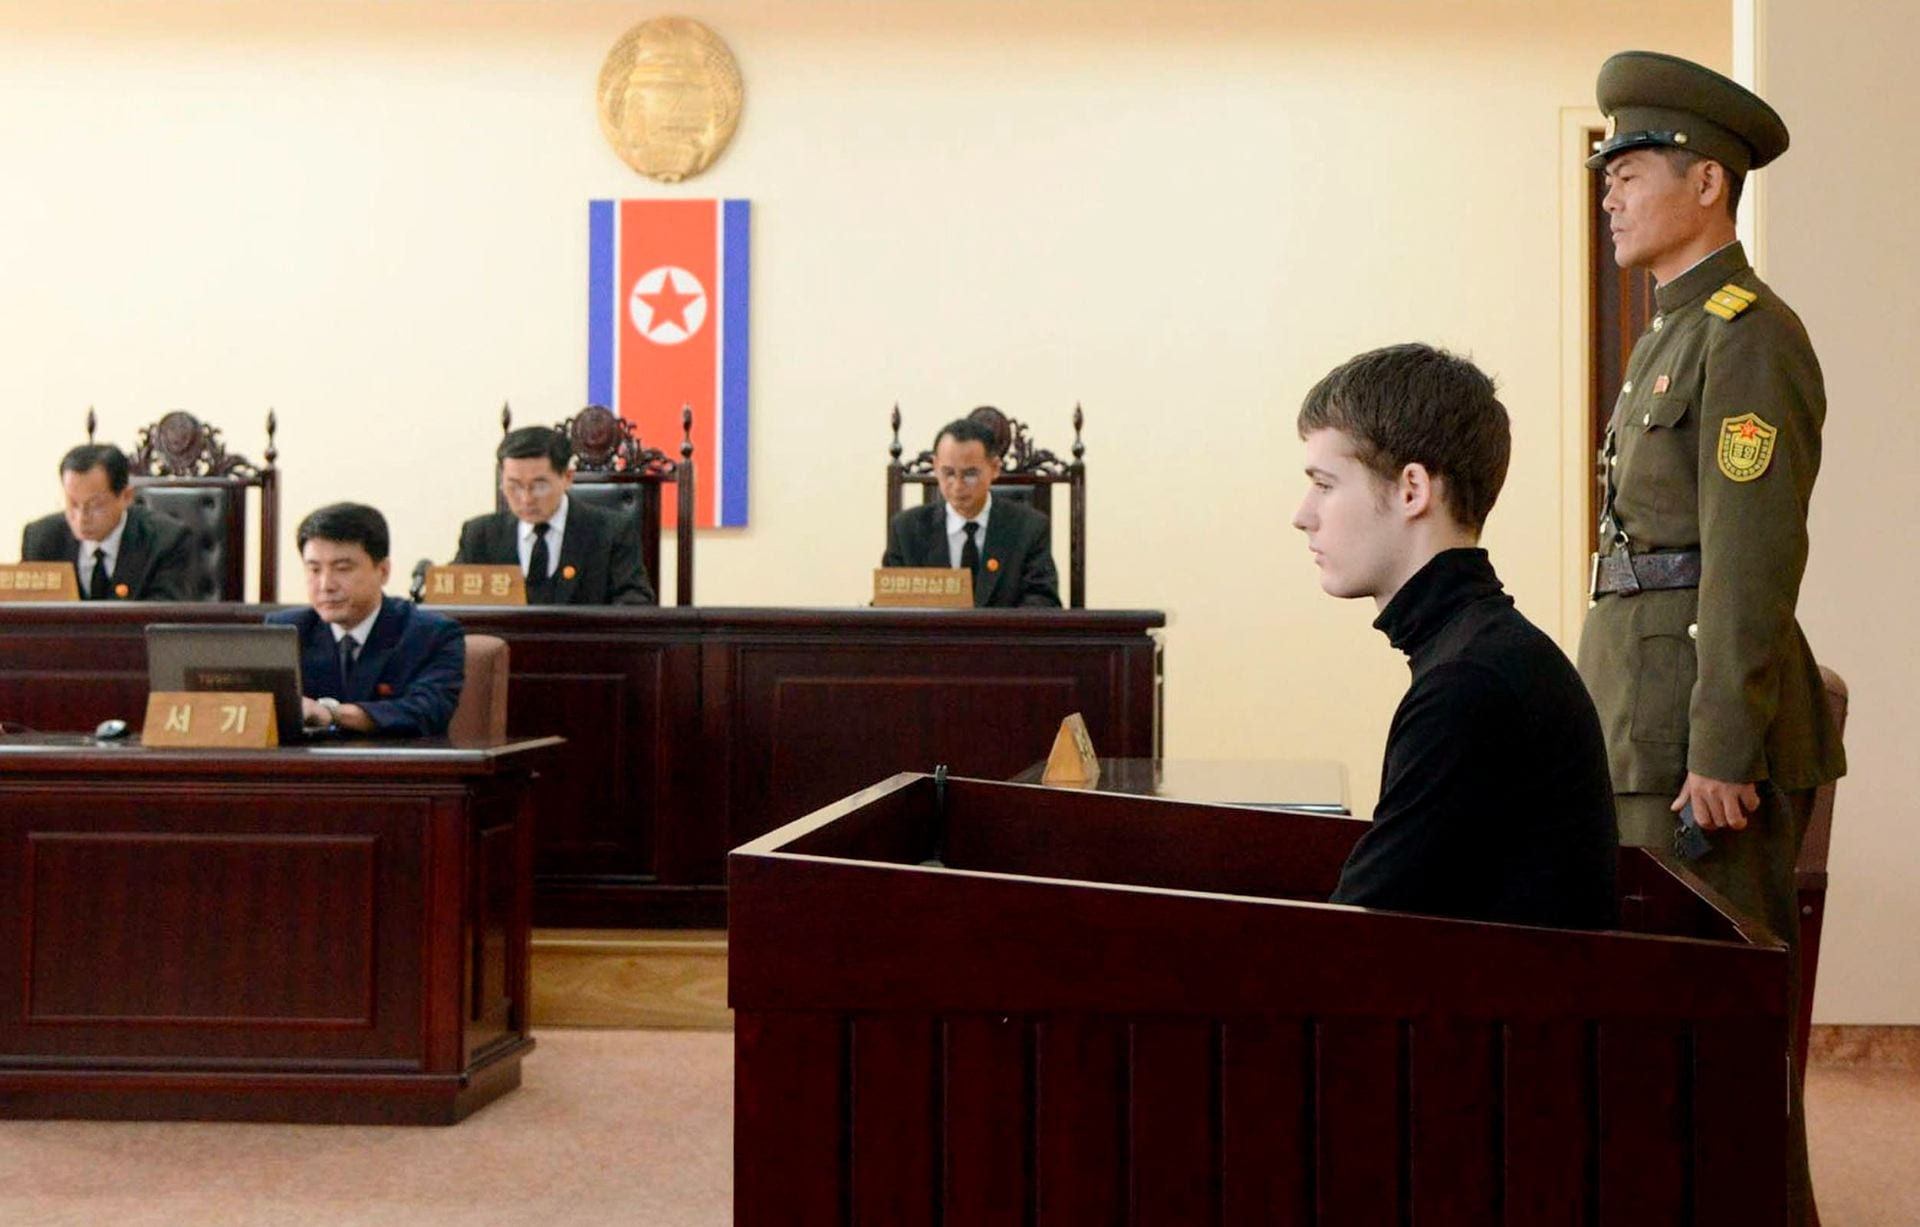 A person sits in a witness booth in front of at least four judges. There is an armed guard standing behind him, and a North Korean flag hanging on the wall behind the judges.